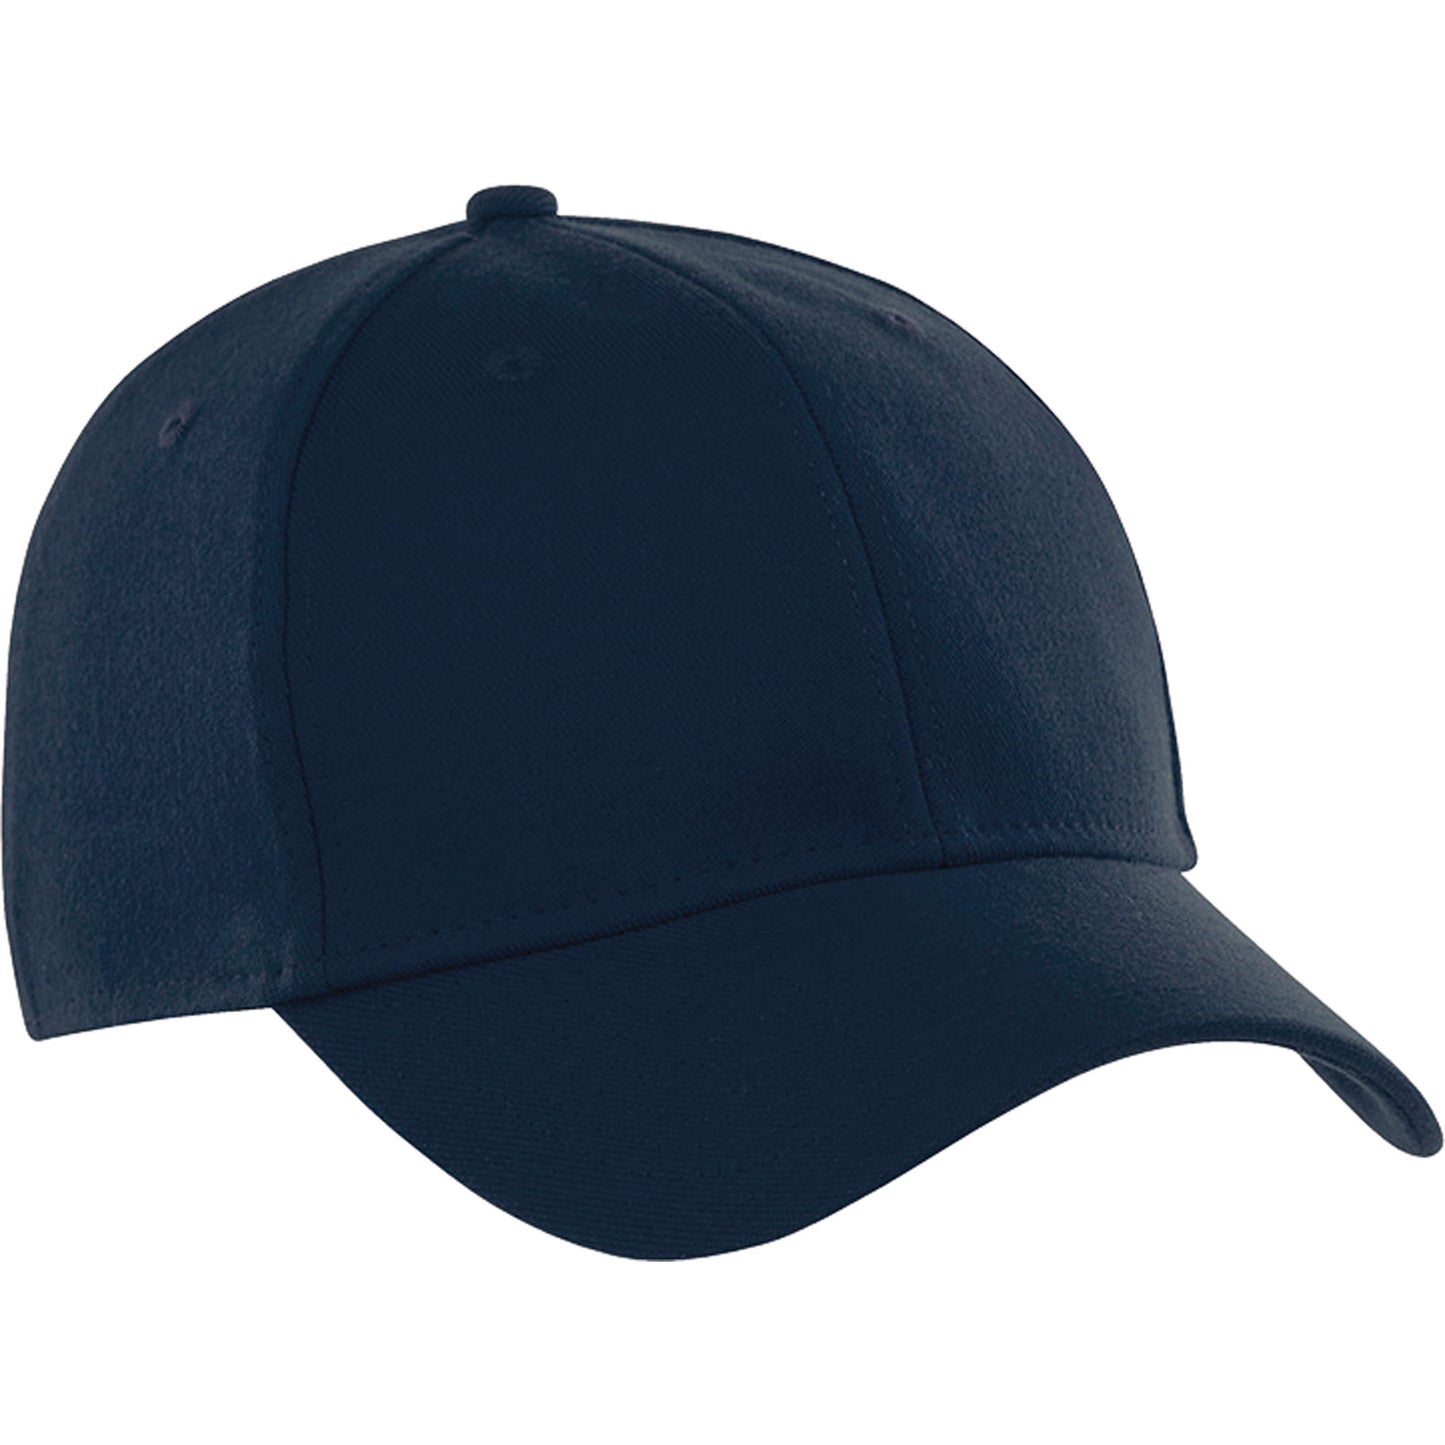 U-ACUITY Fitted Ballcap